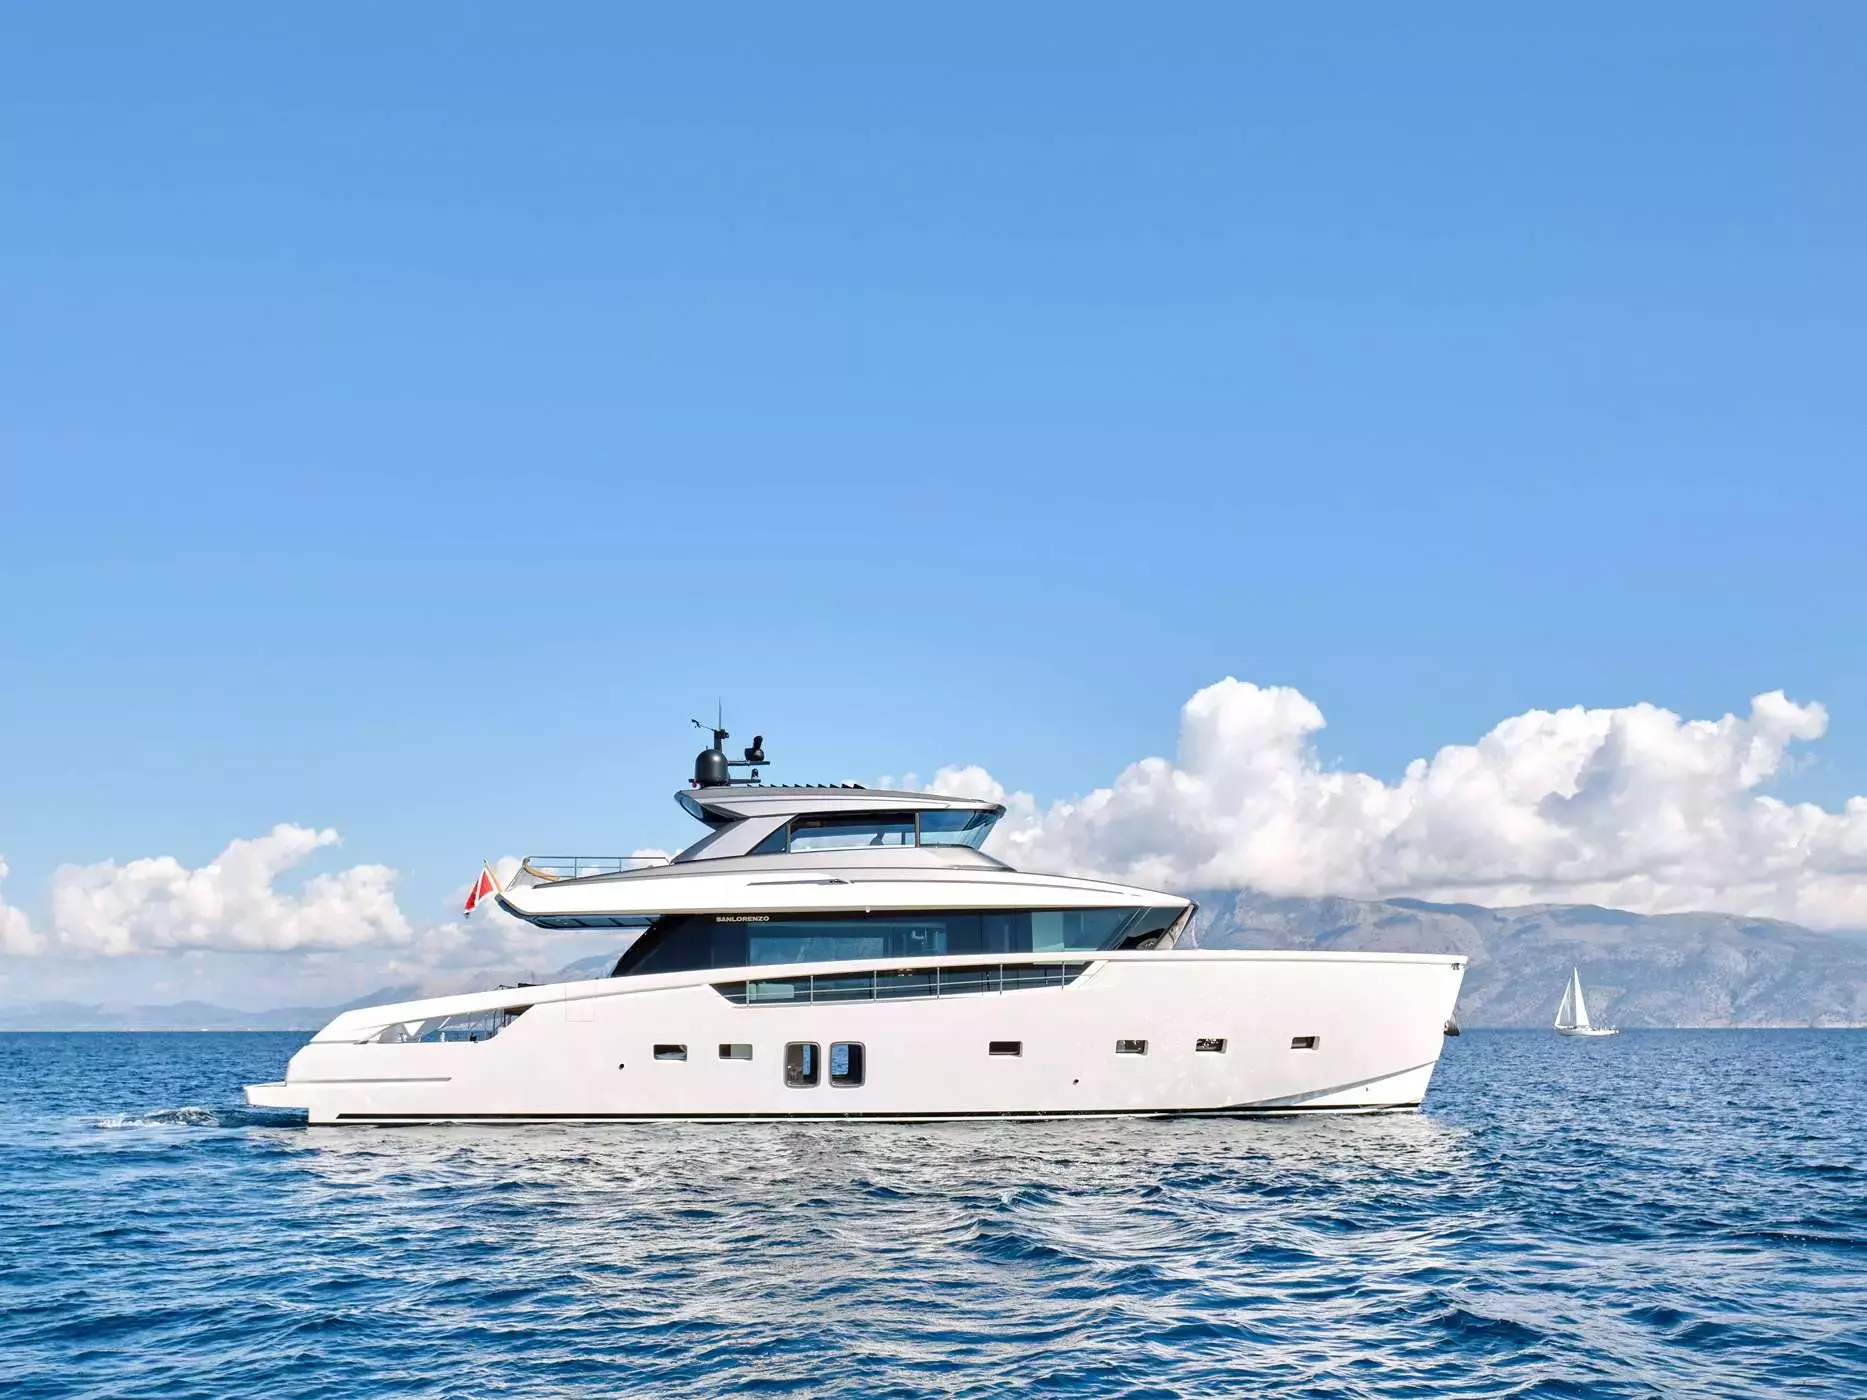 Nirvana by Sanlorenzo - Special Offer for a private Motor Yacht Charter in Patras with a crew